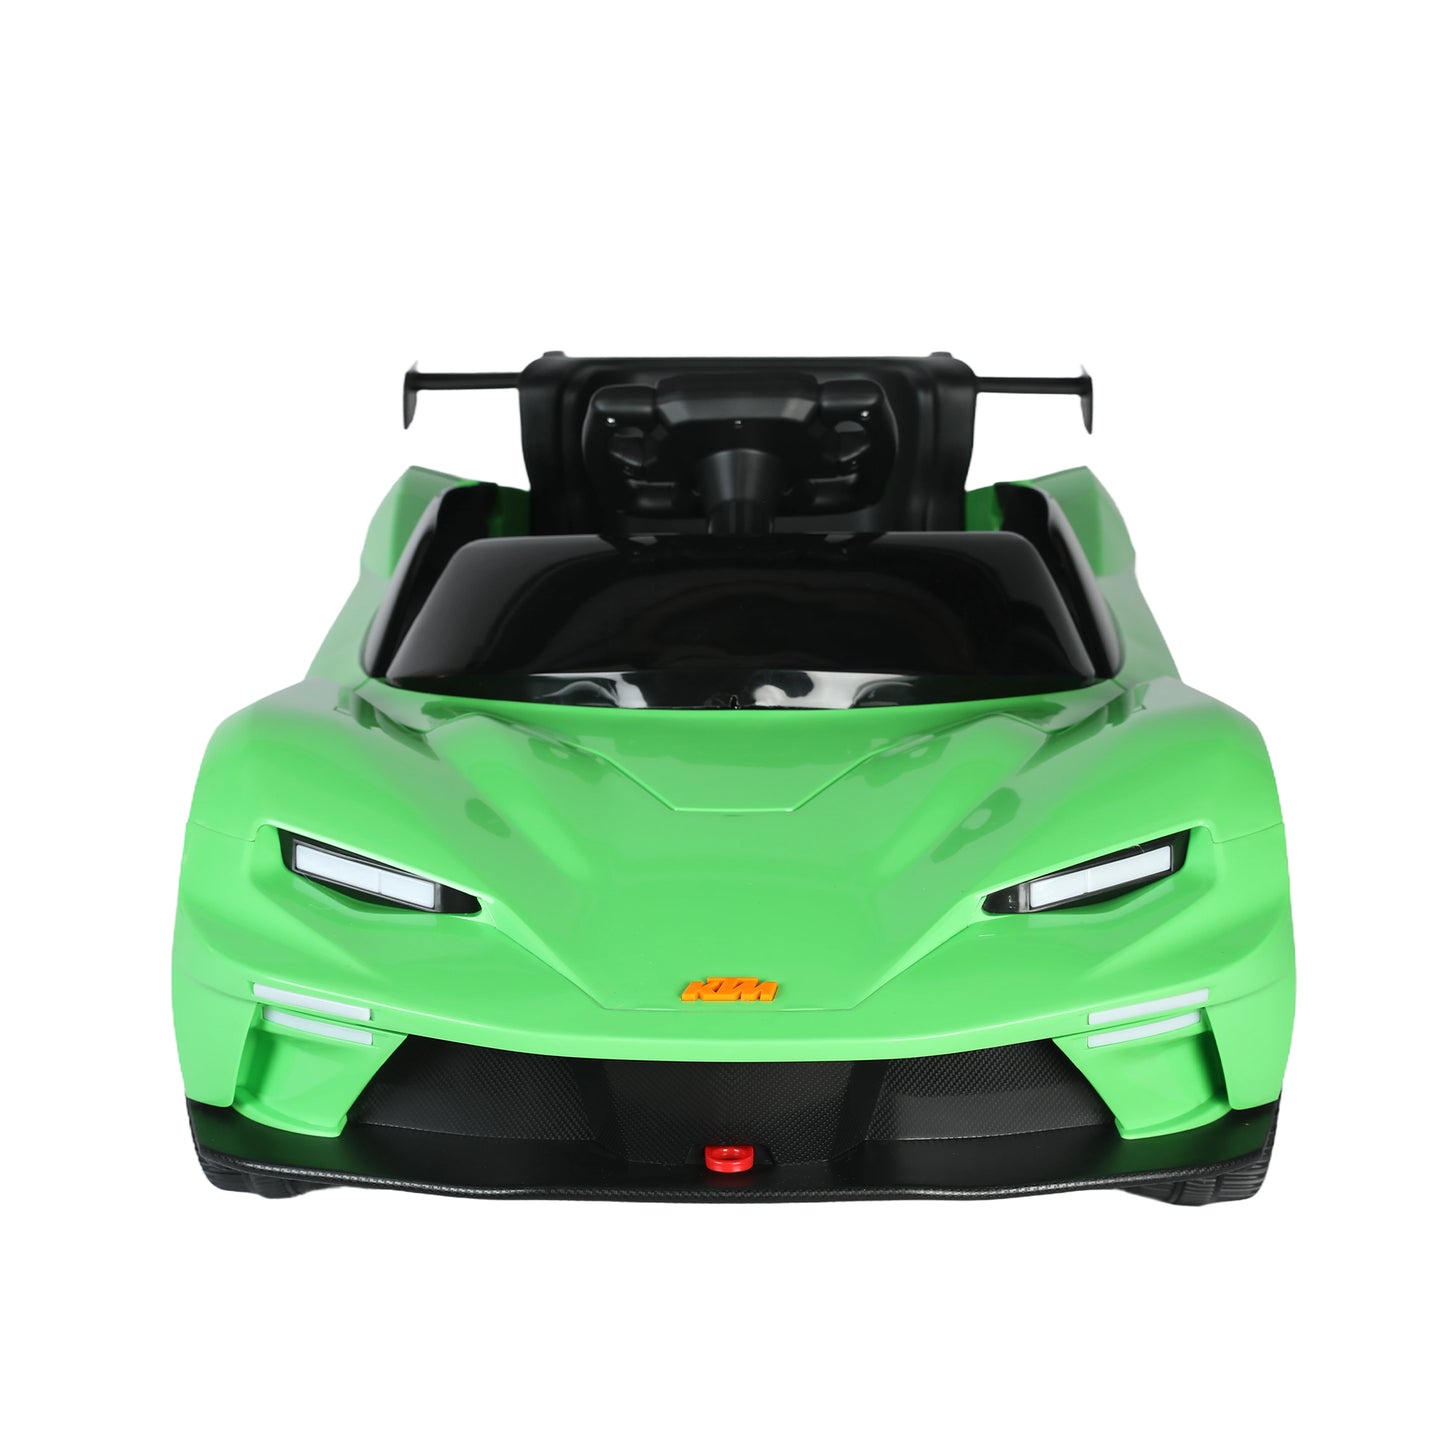 Licensed ktm x bow gtx,12v7A Kids ride on car 2.4G W/Parents Remote Control,electric car for kids,Three speed adjustable,Power display, USB,MP3 ,Bluetooth,LED light,Two-point safety belt